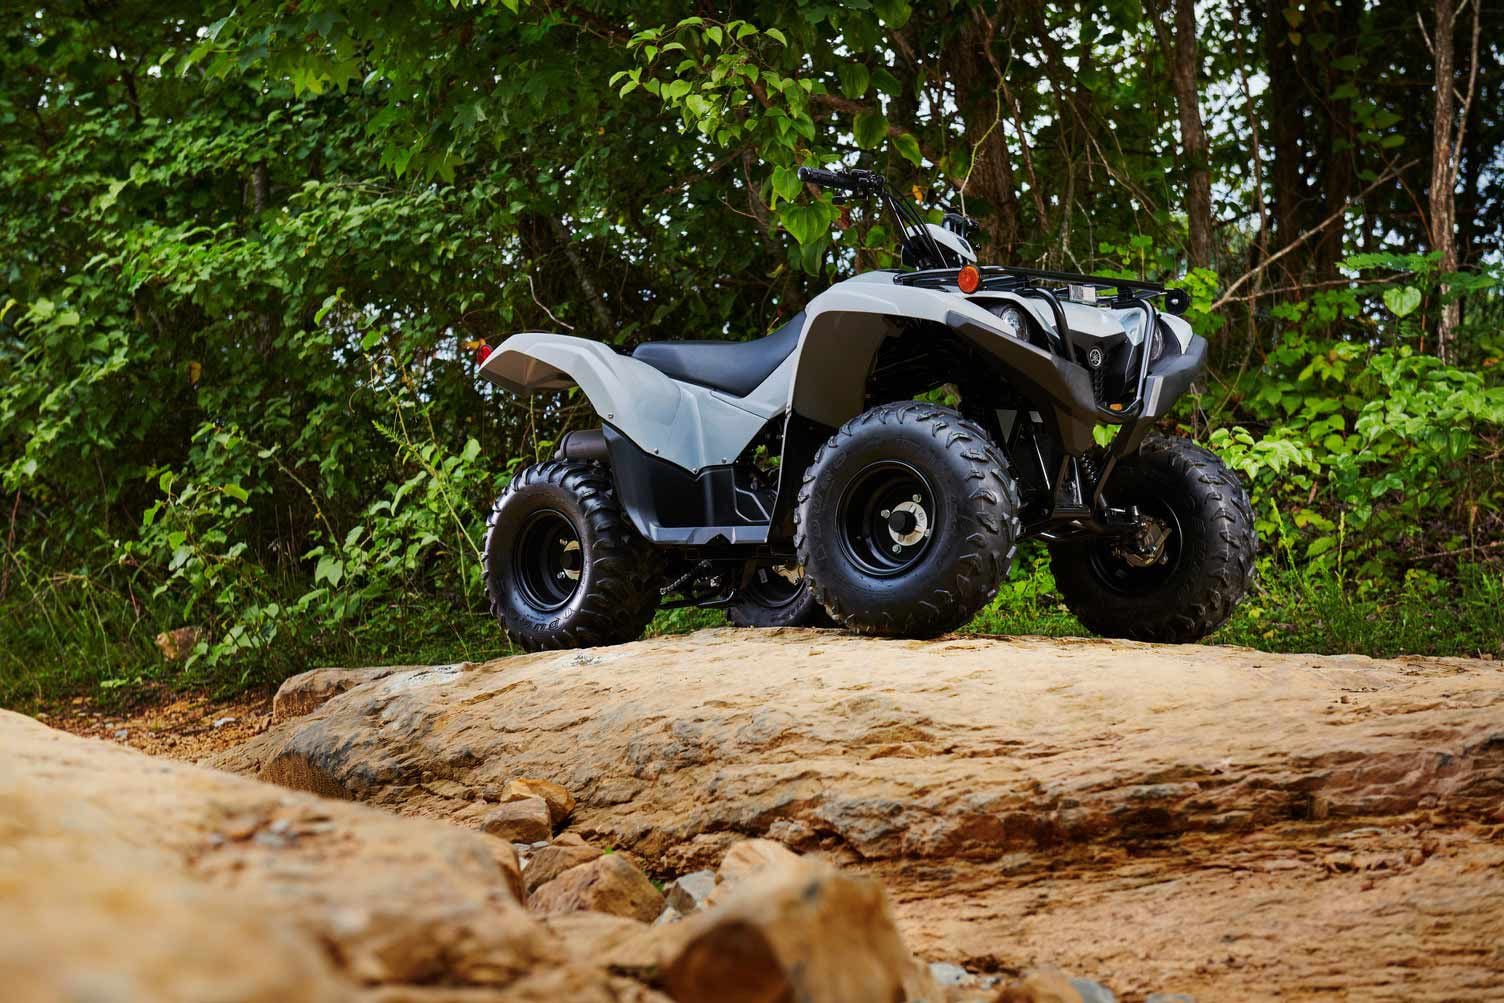 The 2022 Yamaha Grizzly 90 in Armor Gray.